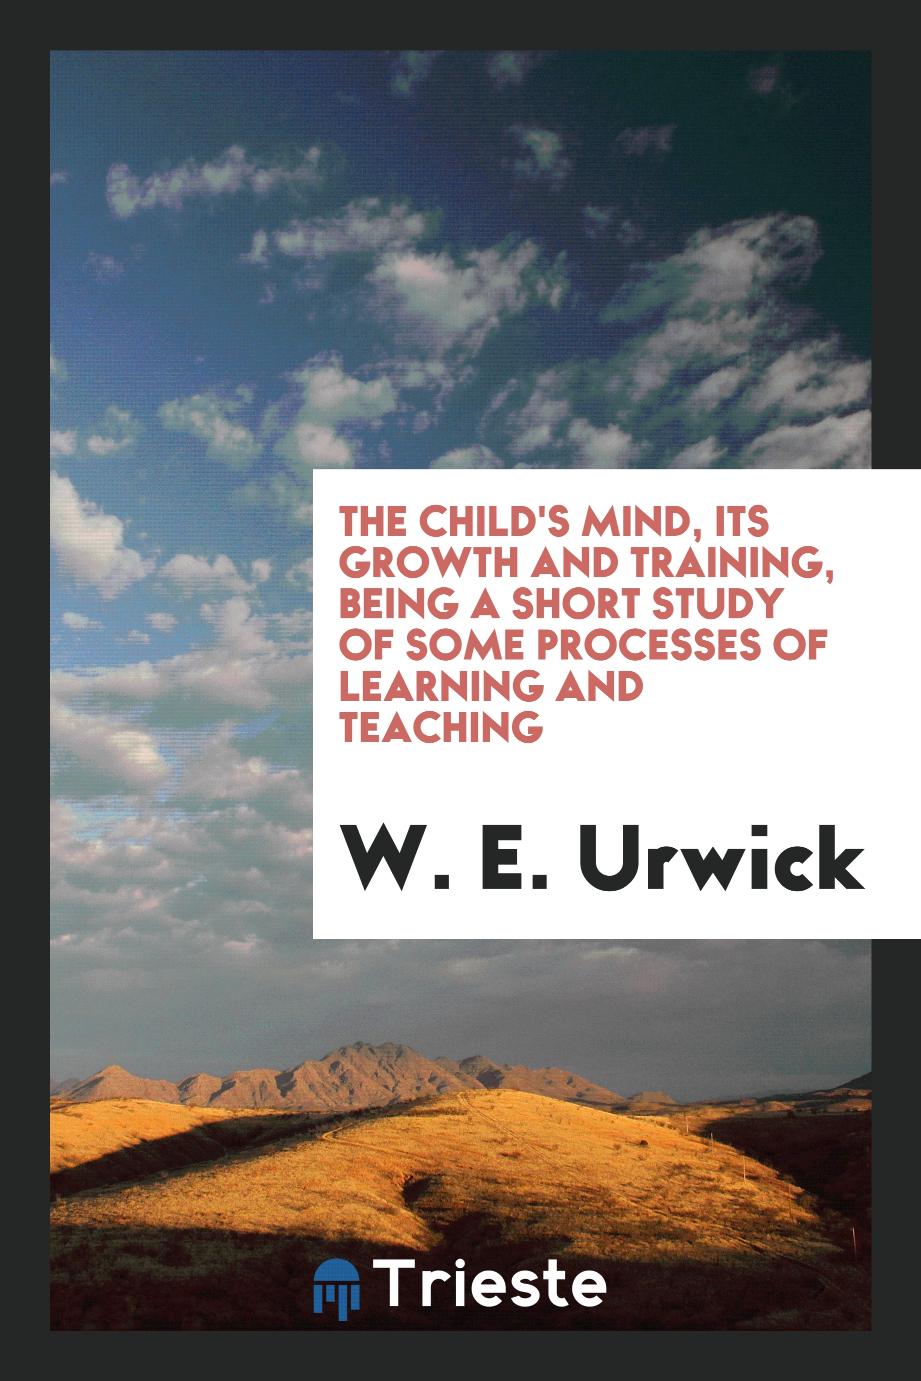 The child's mind, its growth and training, being a short study of some processes of learning and teaching